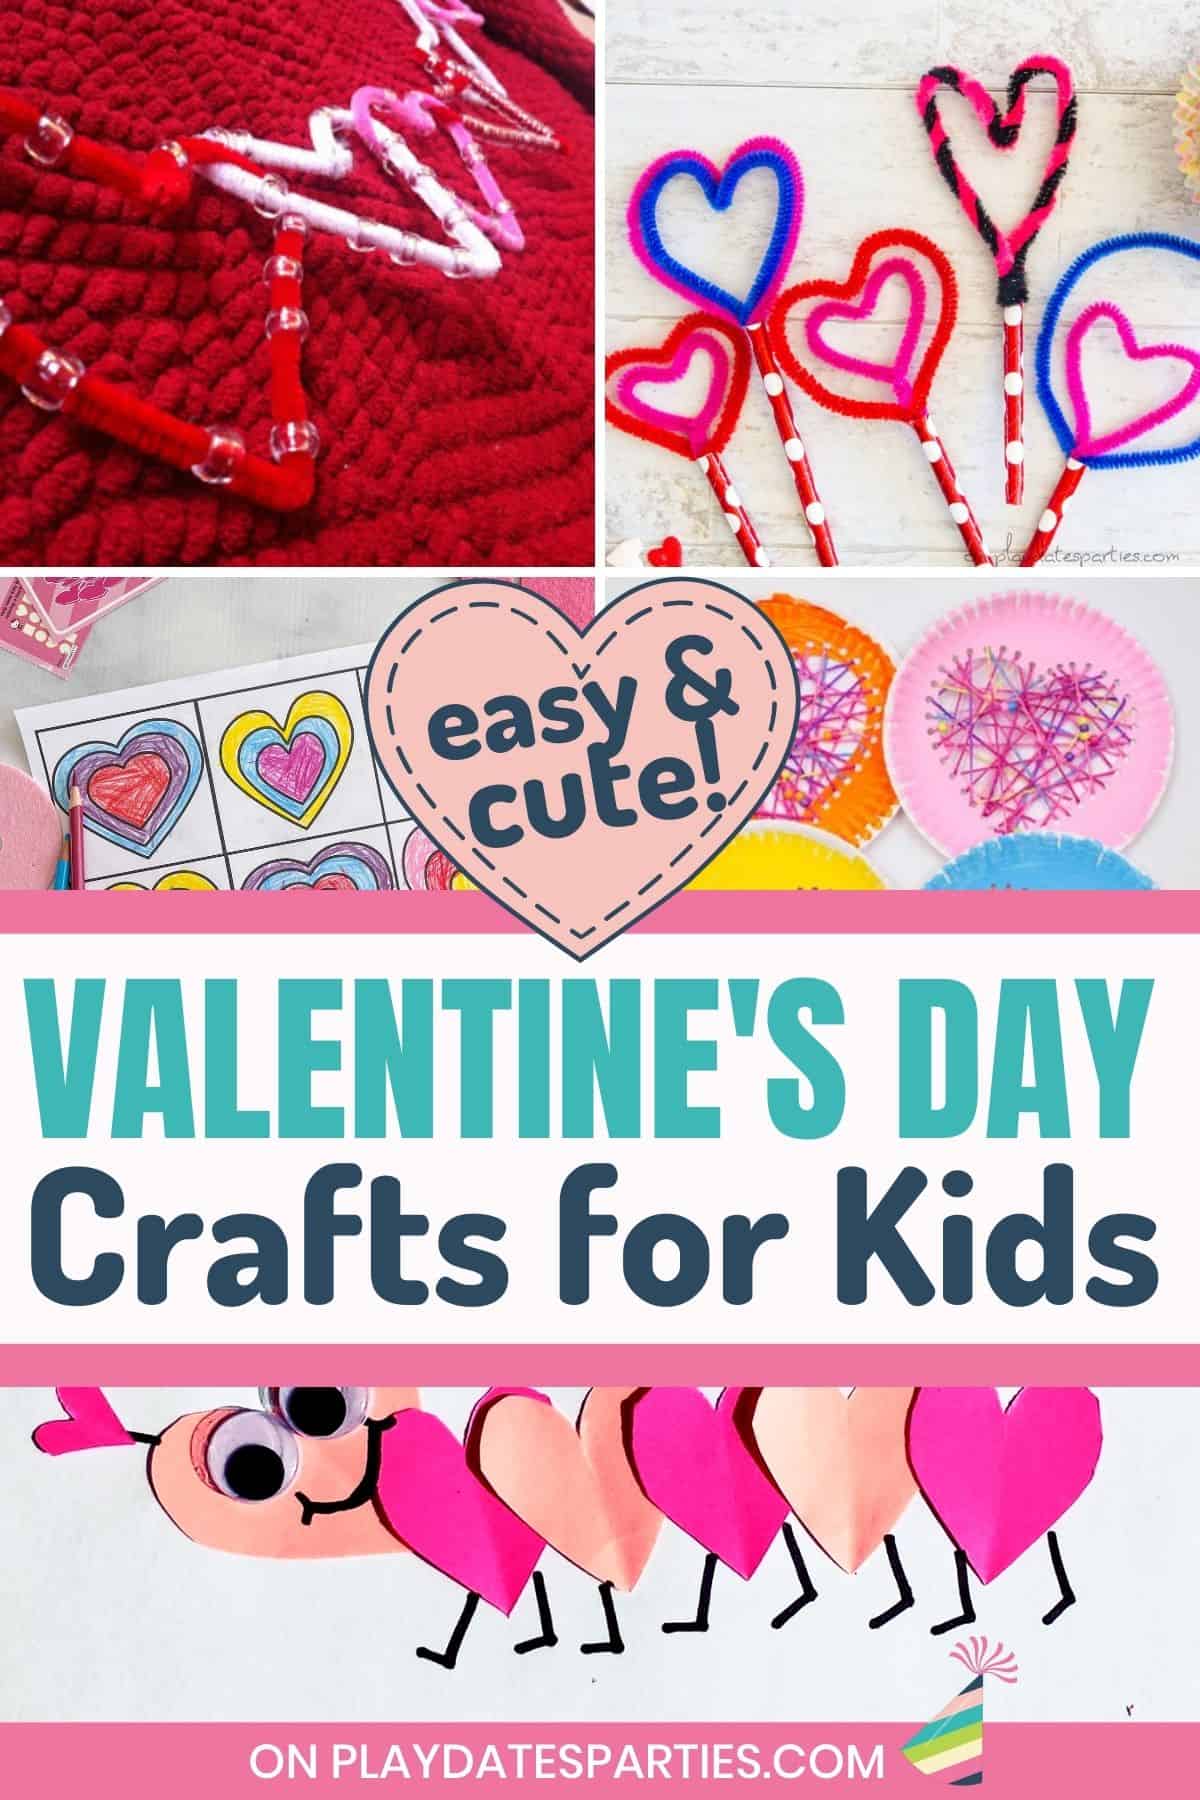 11 Adorable Valentine's Day Crafts for Kids